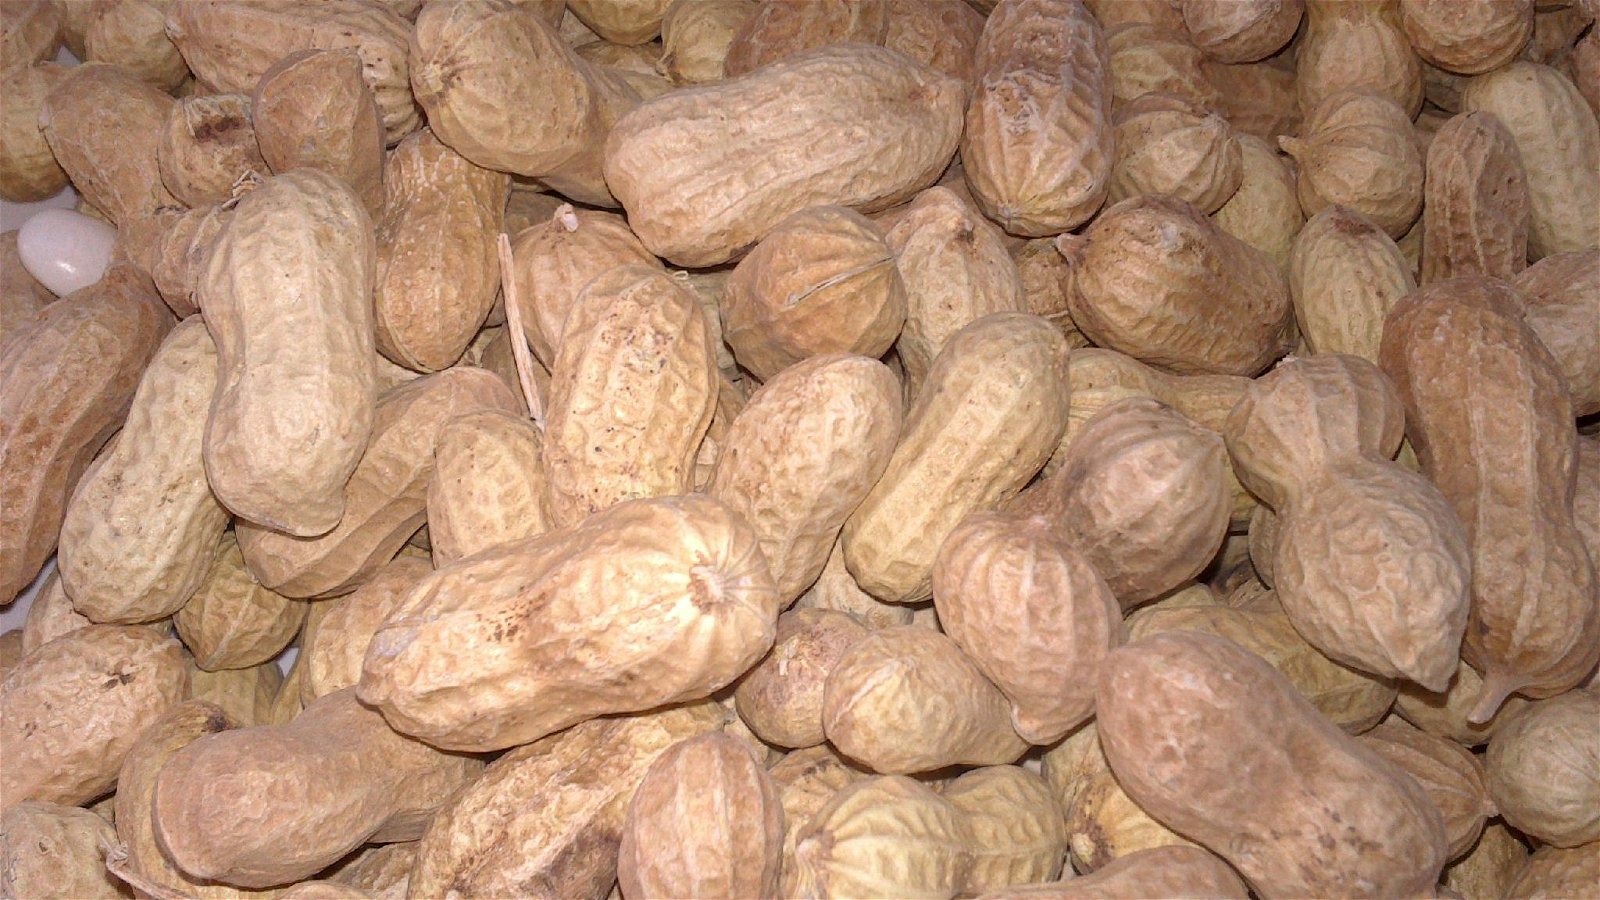 Peanuts in Shell and without 2